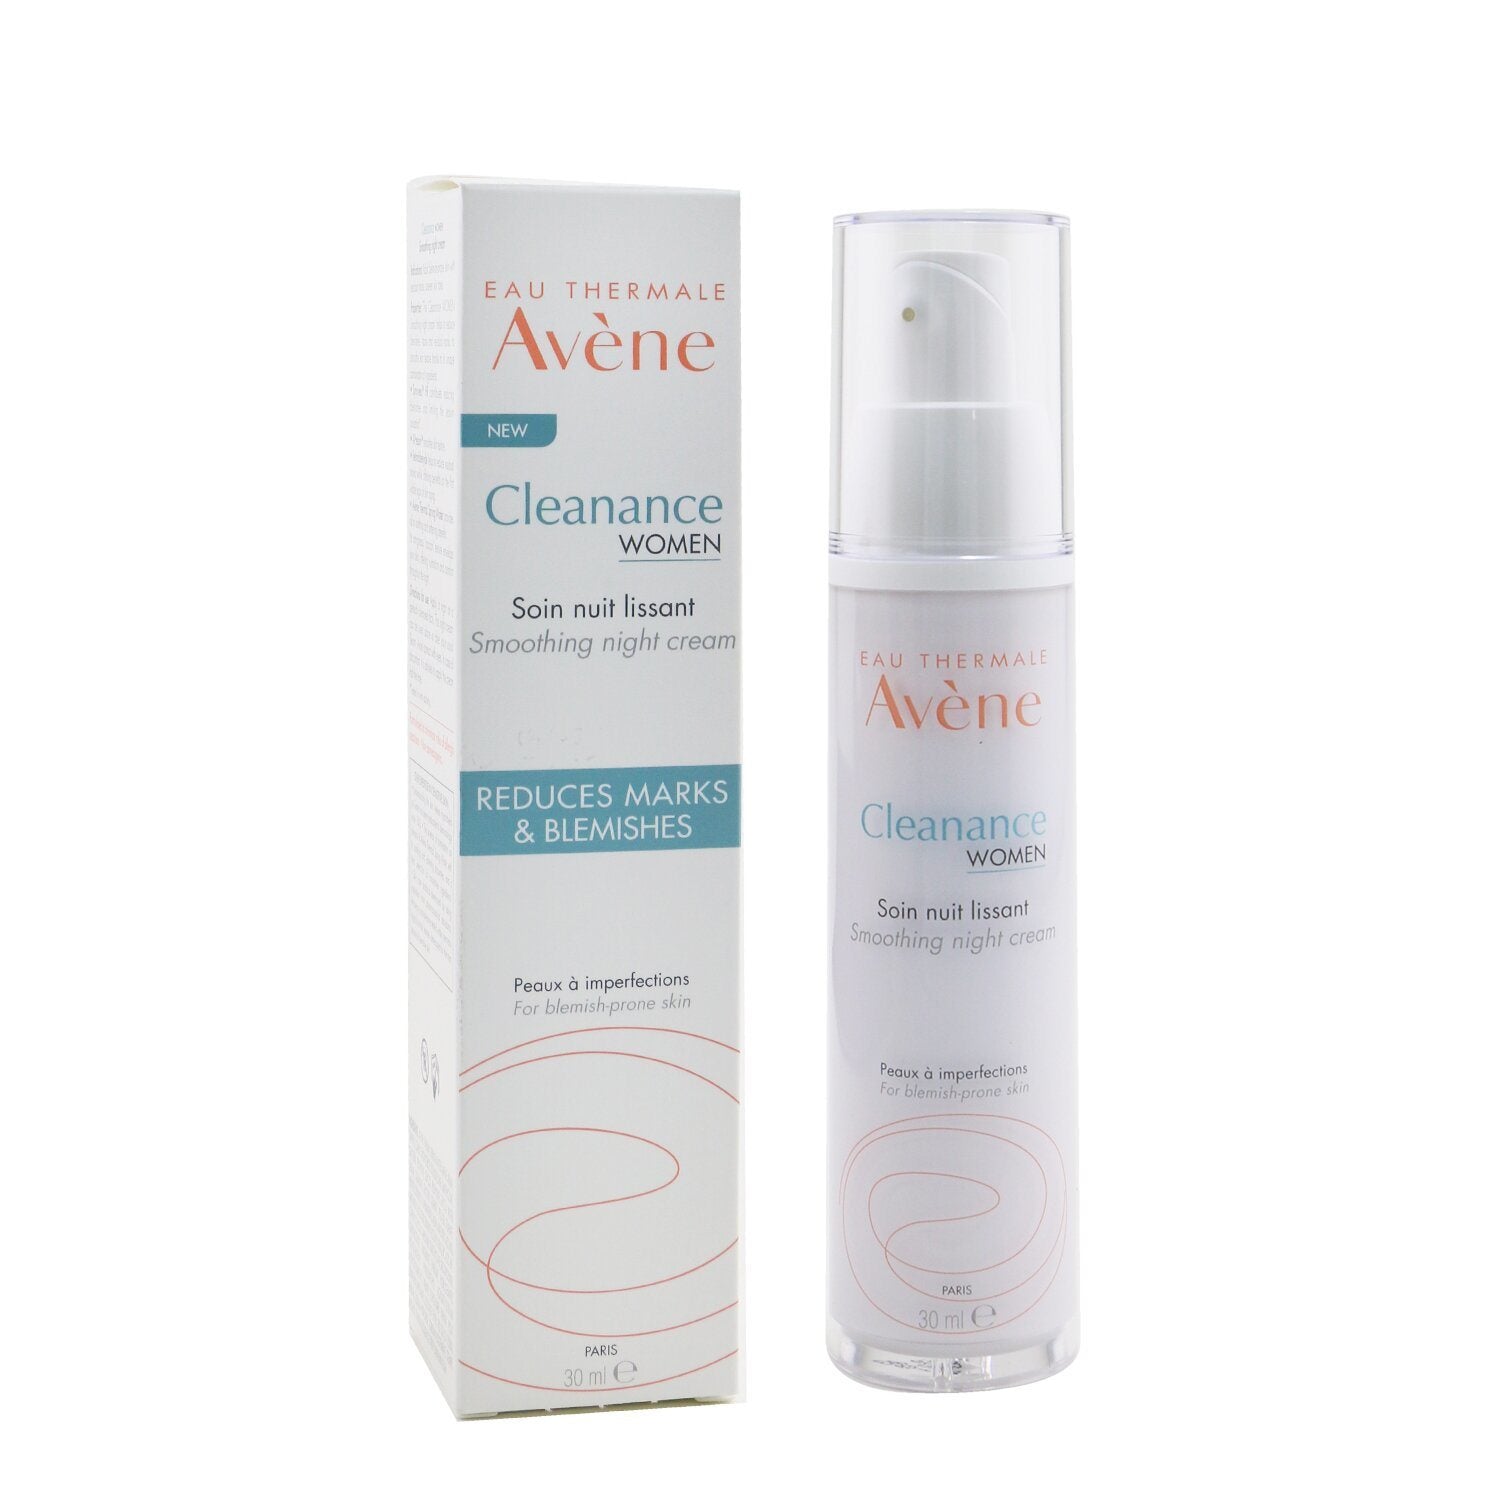 Cleanance WOMEN Smoothing Night Cream - For Blemish-Prone Skin cleanser for sebum production with a white bottle on a white background.